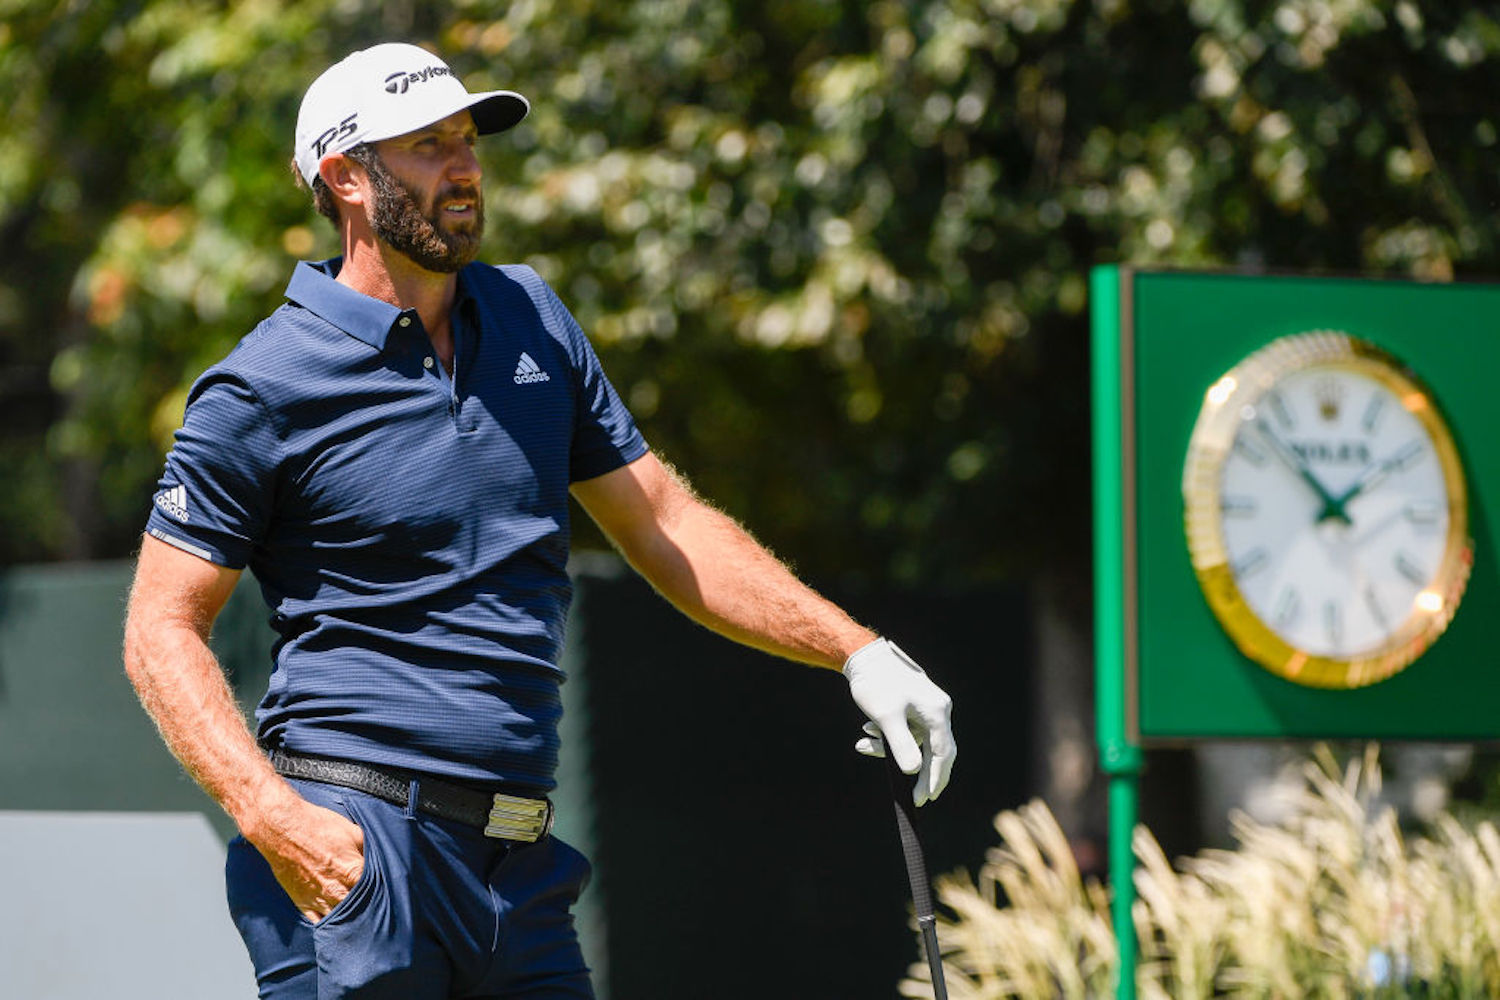 Dustin Johnson kept his hot streak alive by winning the 2020 TOUR Championship and scoring the biggest payday in PGA Tour history.